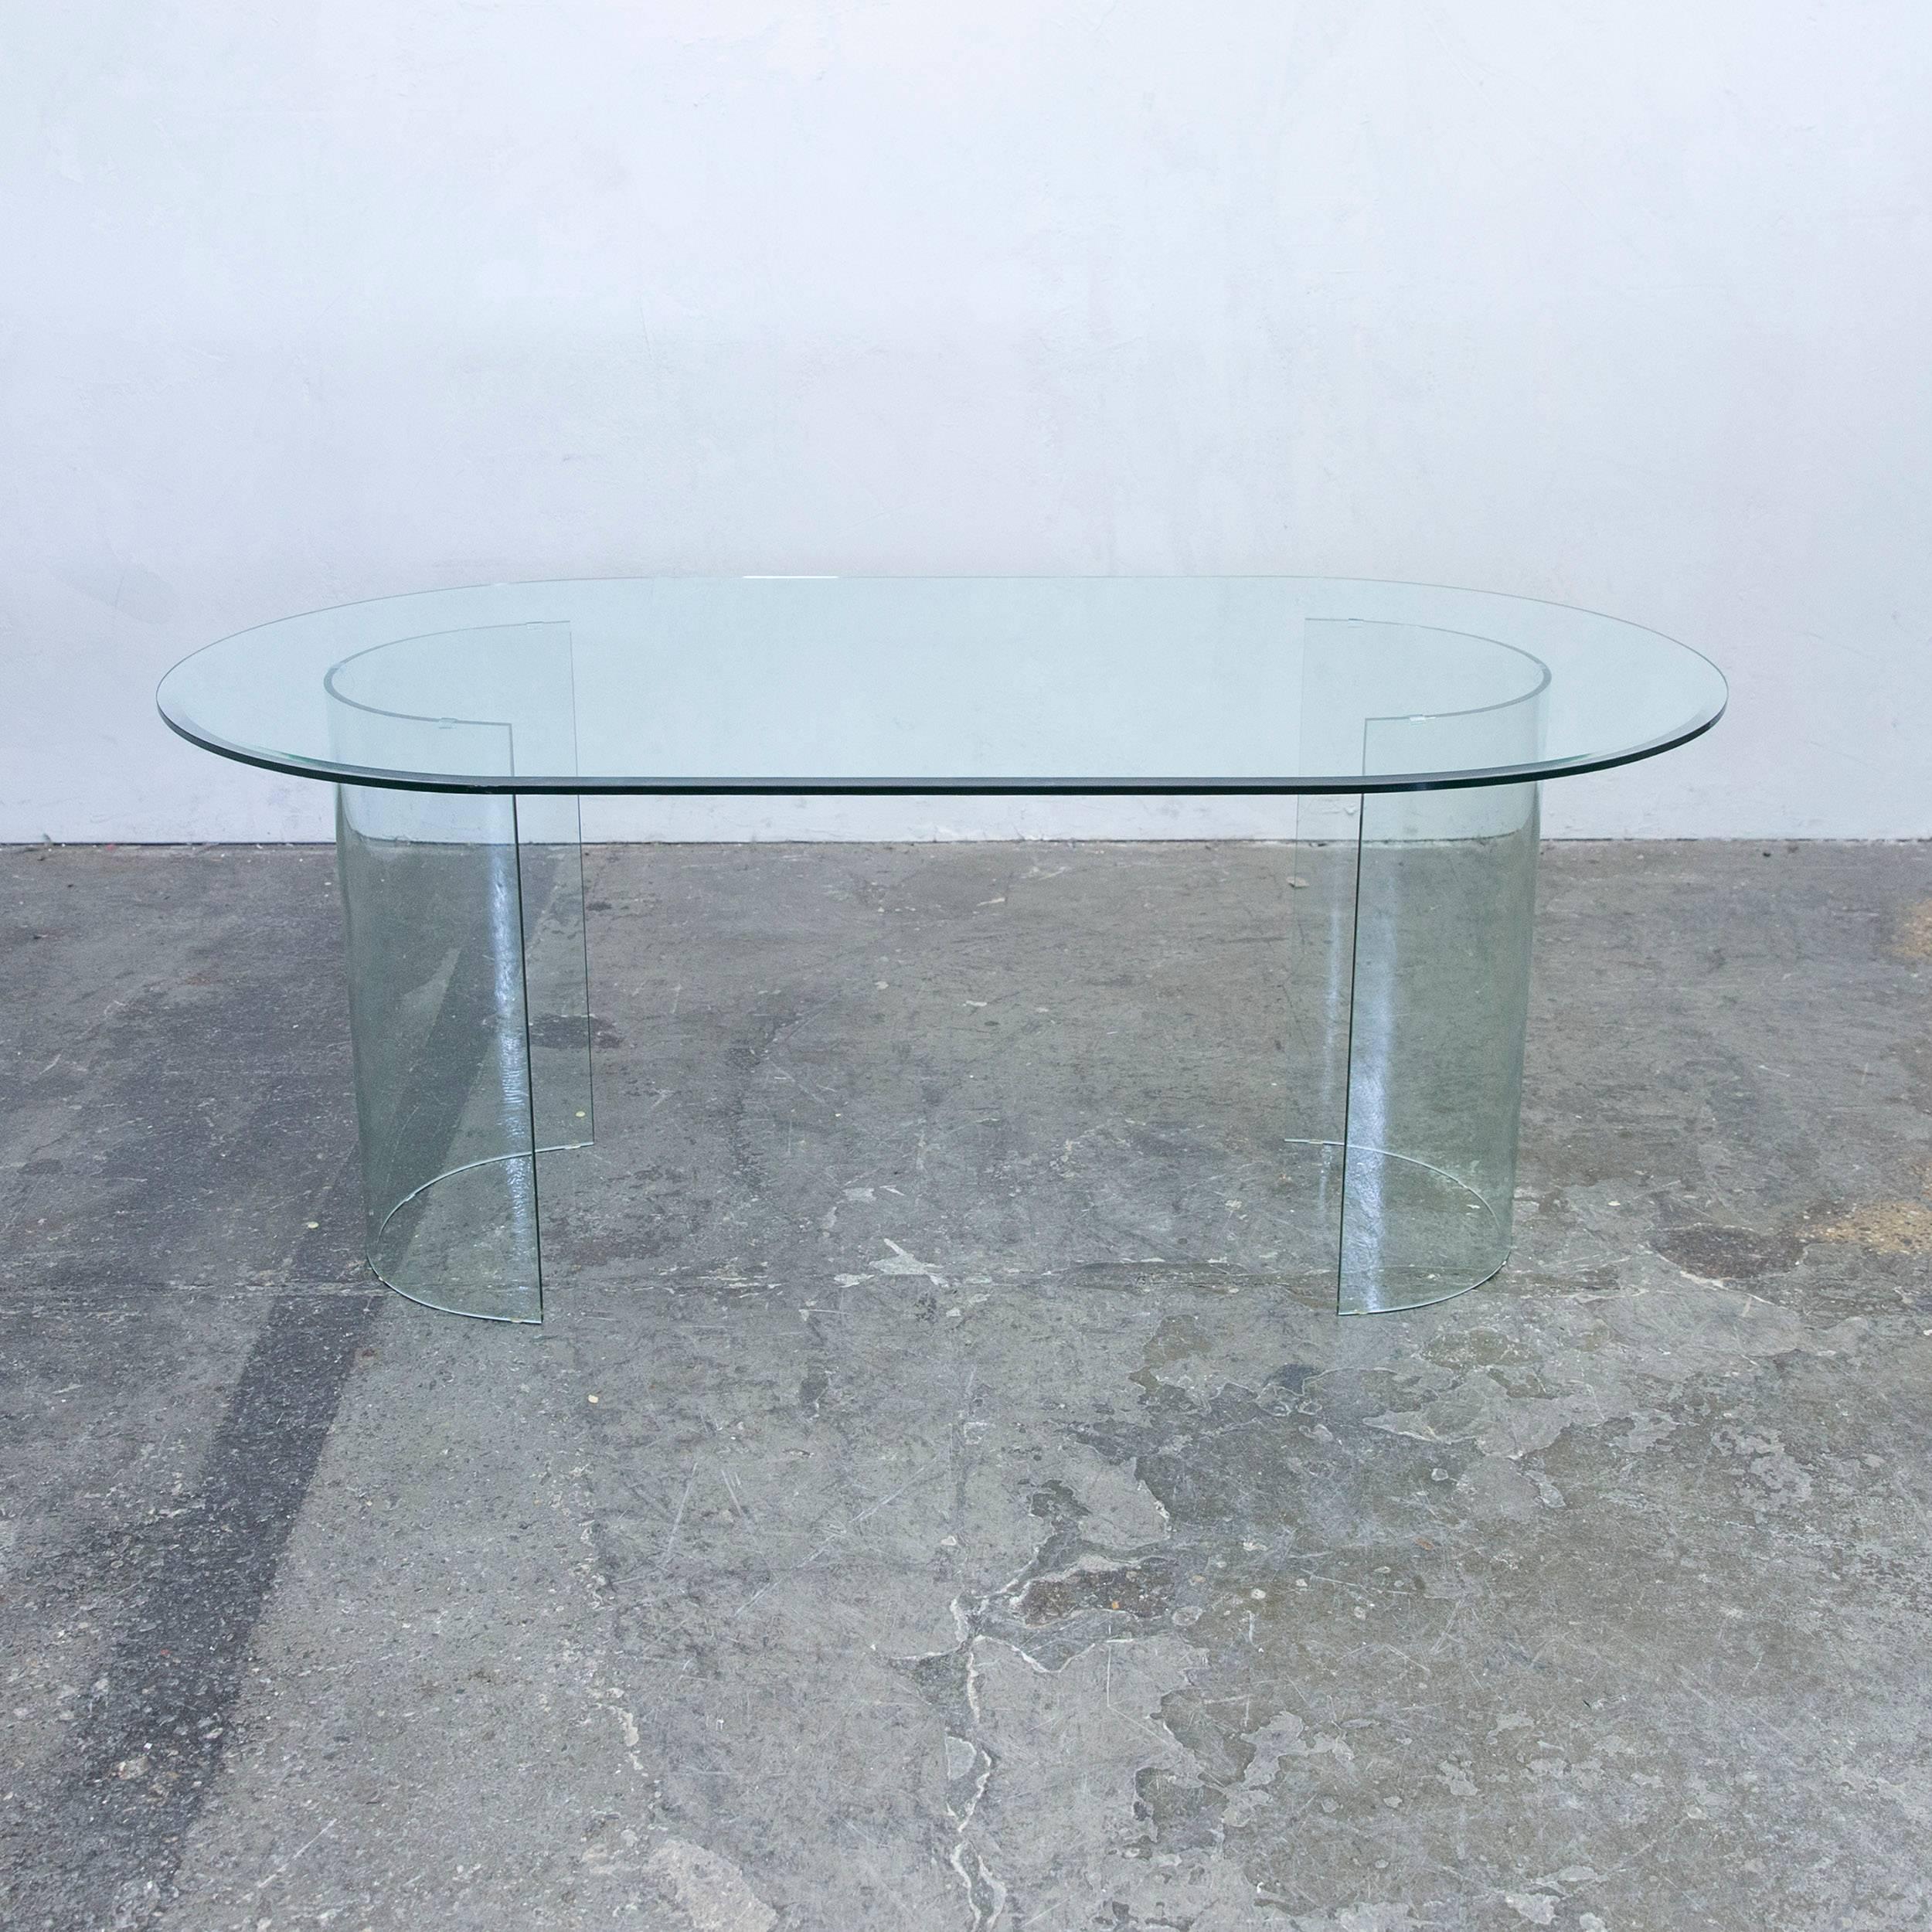 Transparent green colored glass designer sofa table, in a minimalistic and modern design, made for pure style.